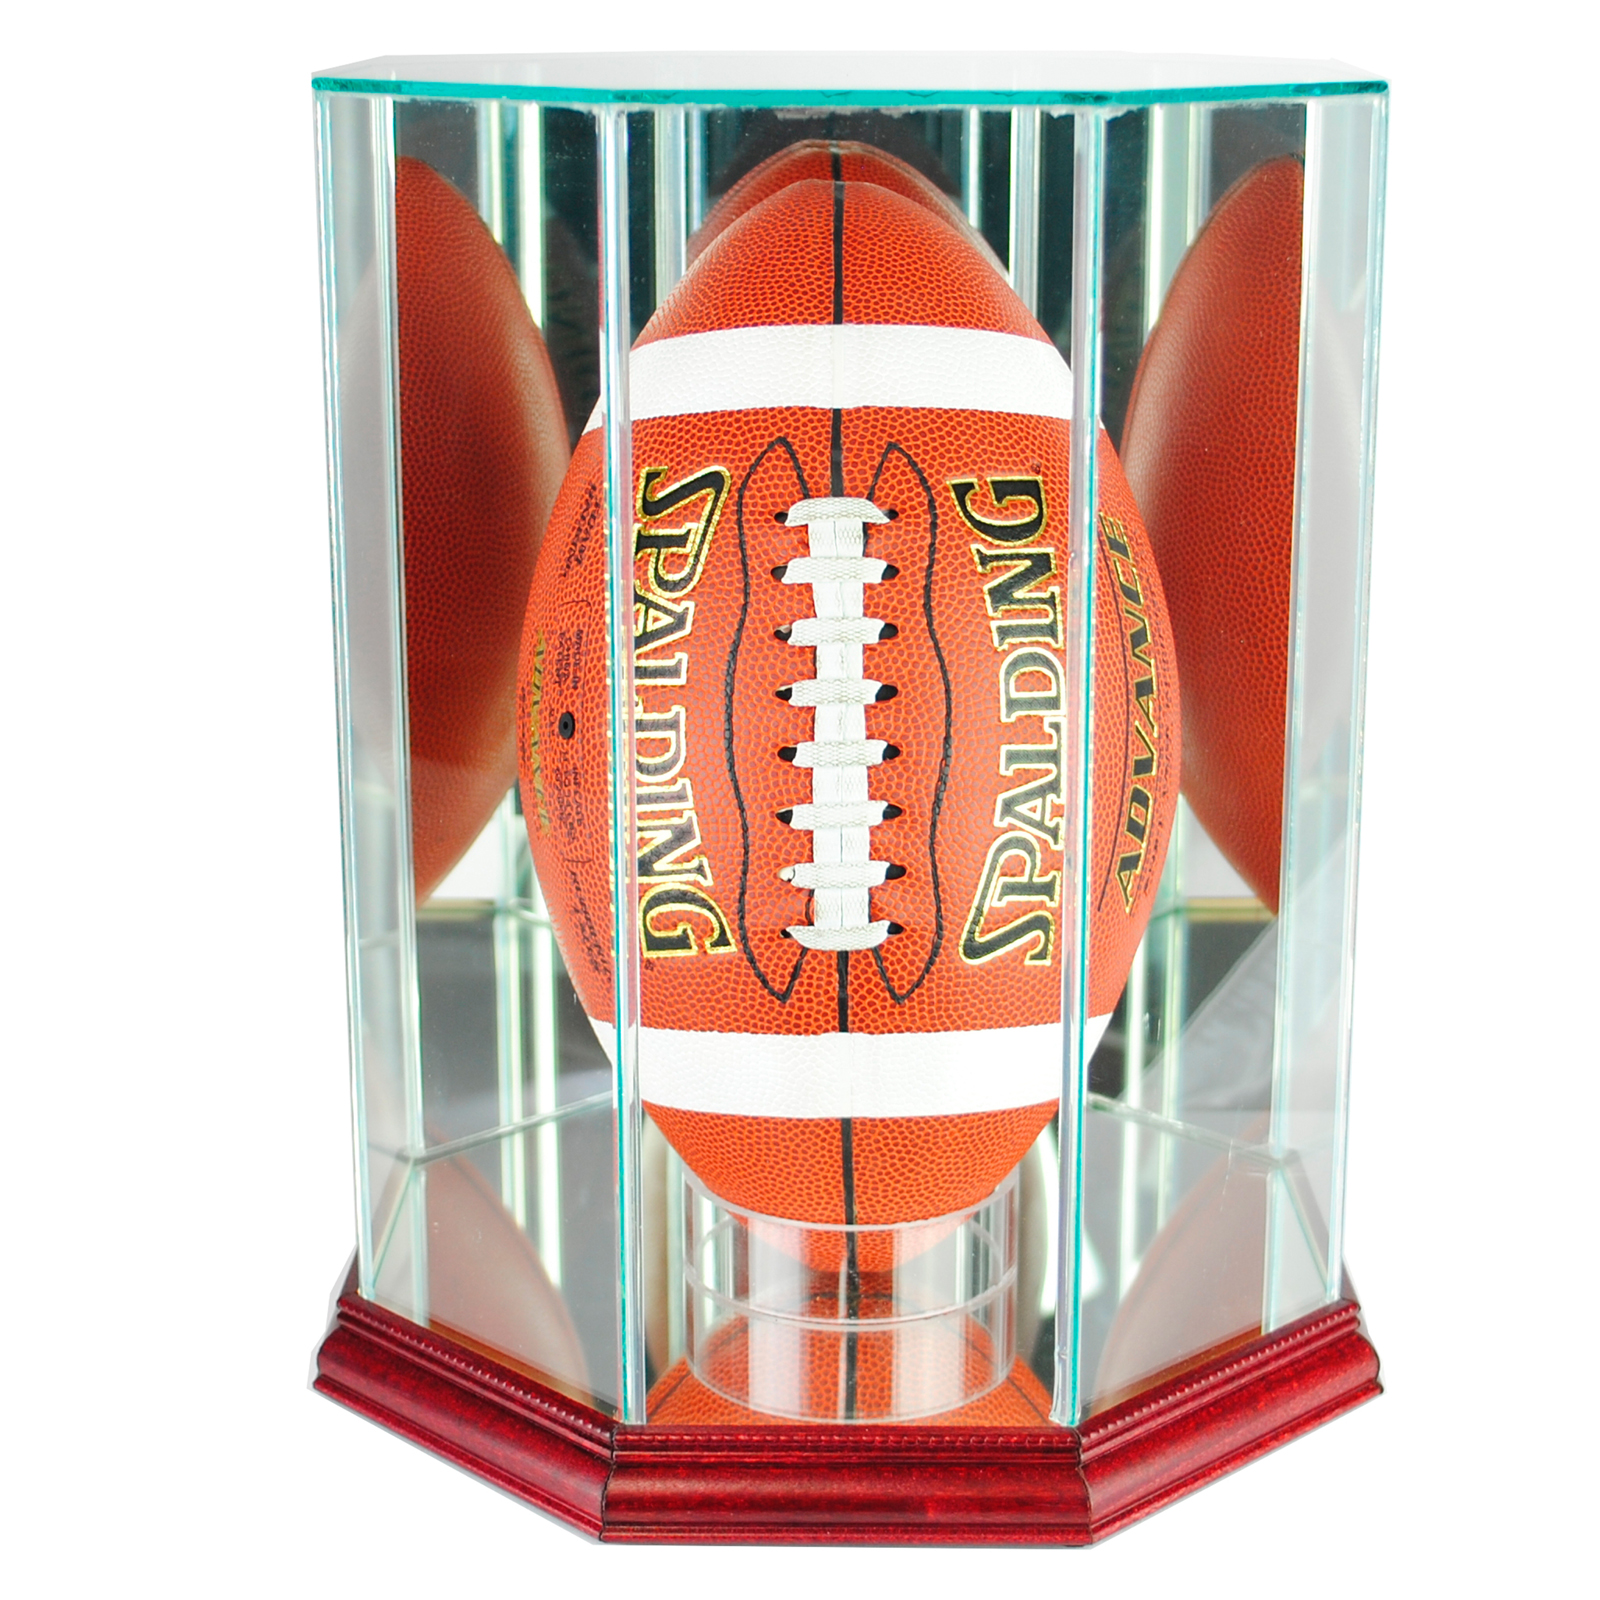 Perfect Cases Upright Octagon Football Display Case